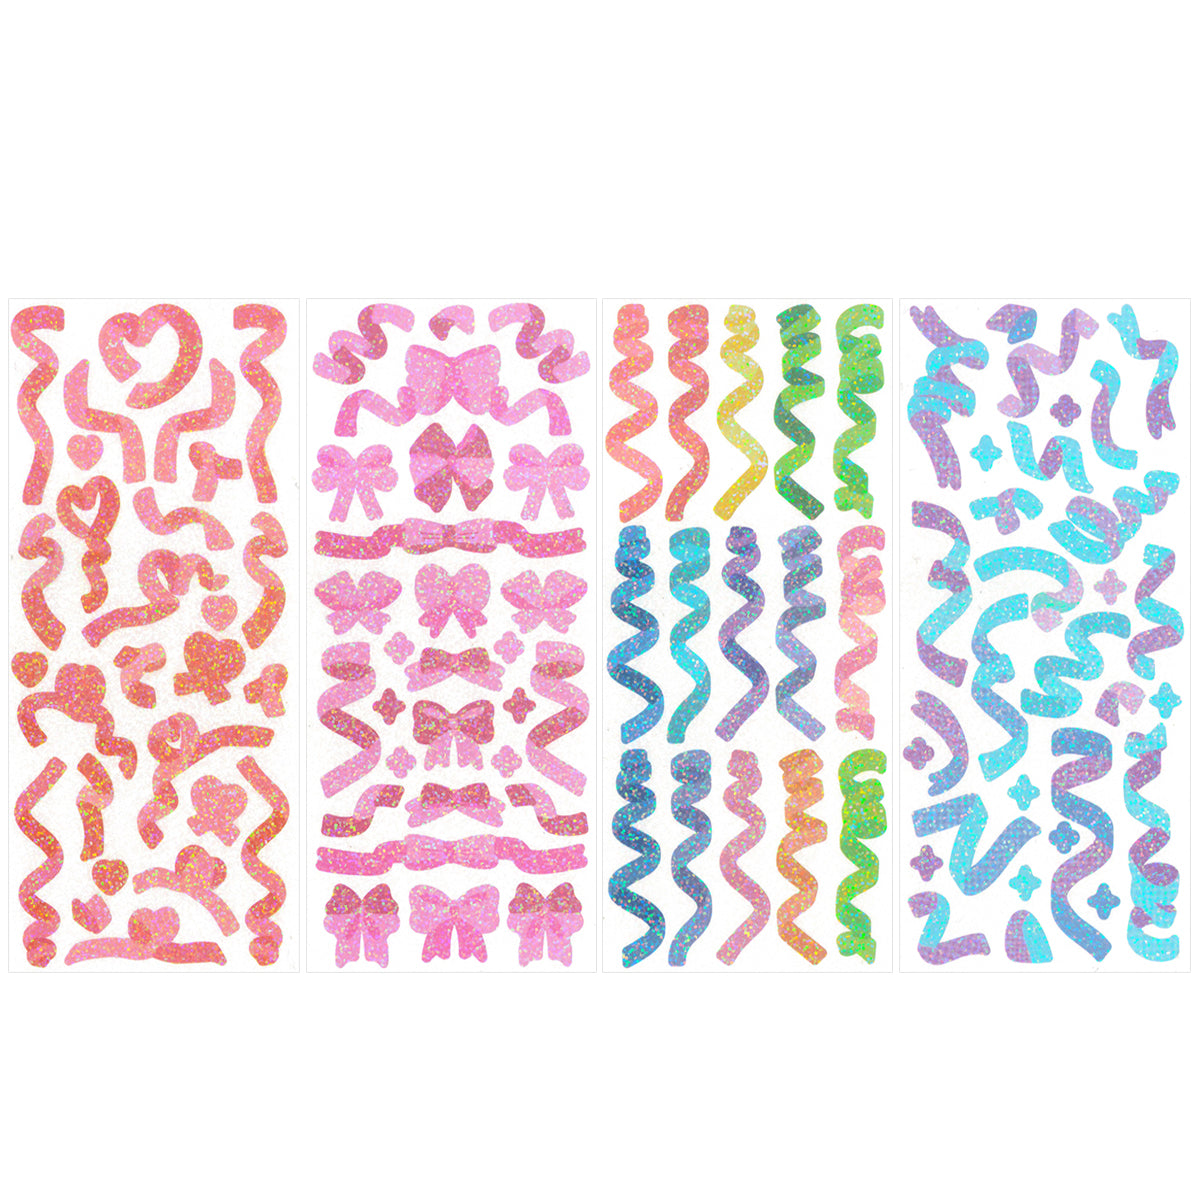 Wrapables Colorful Decorative Stickers for Scrapbooking, DIY Crafts, S